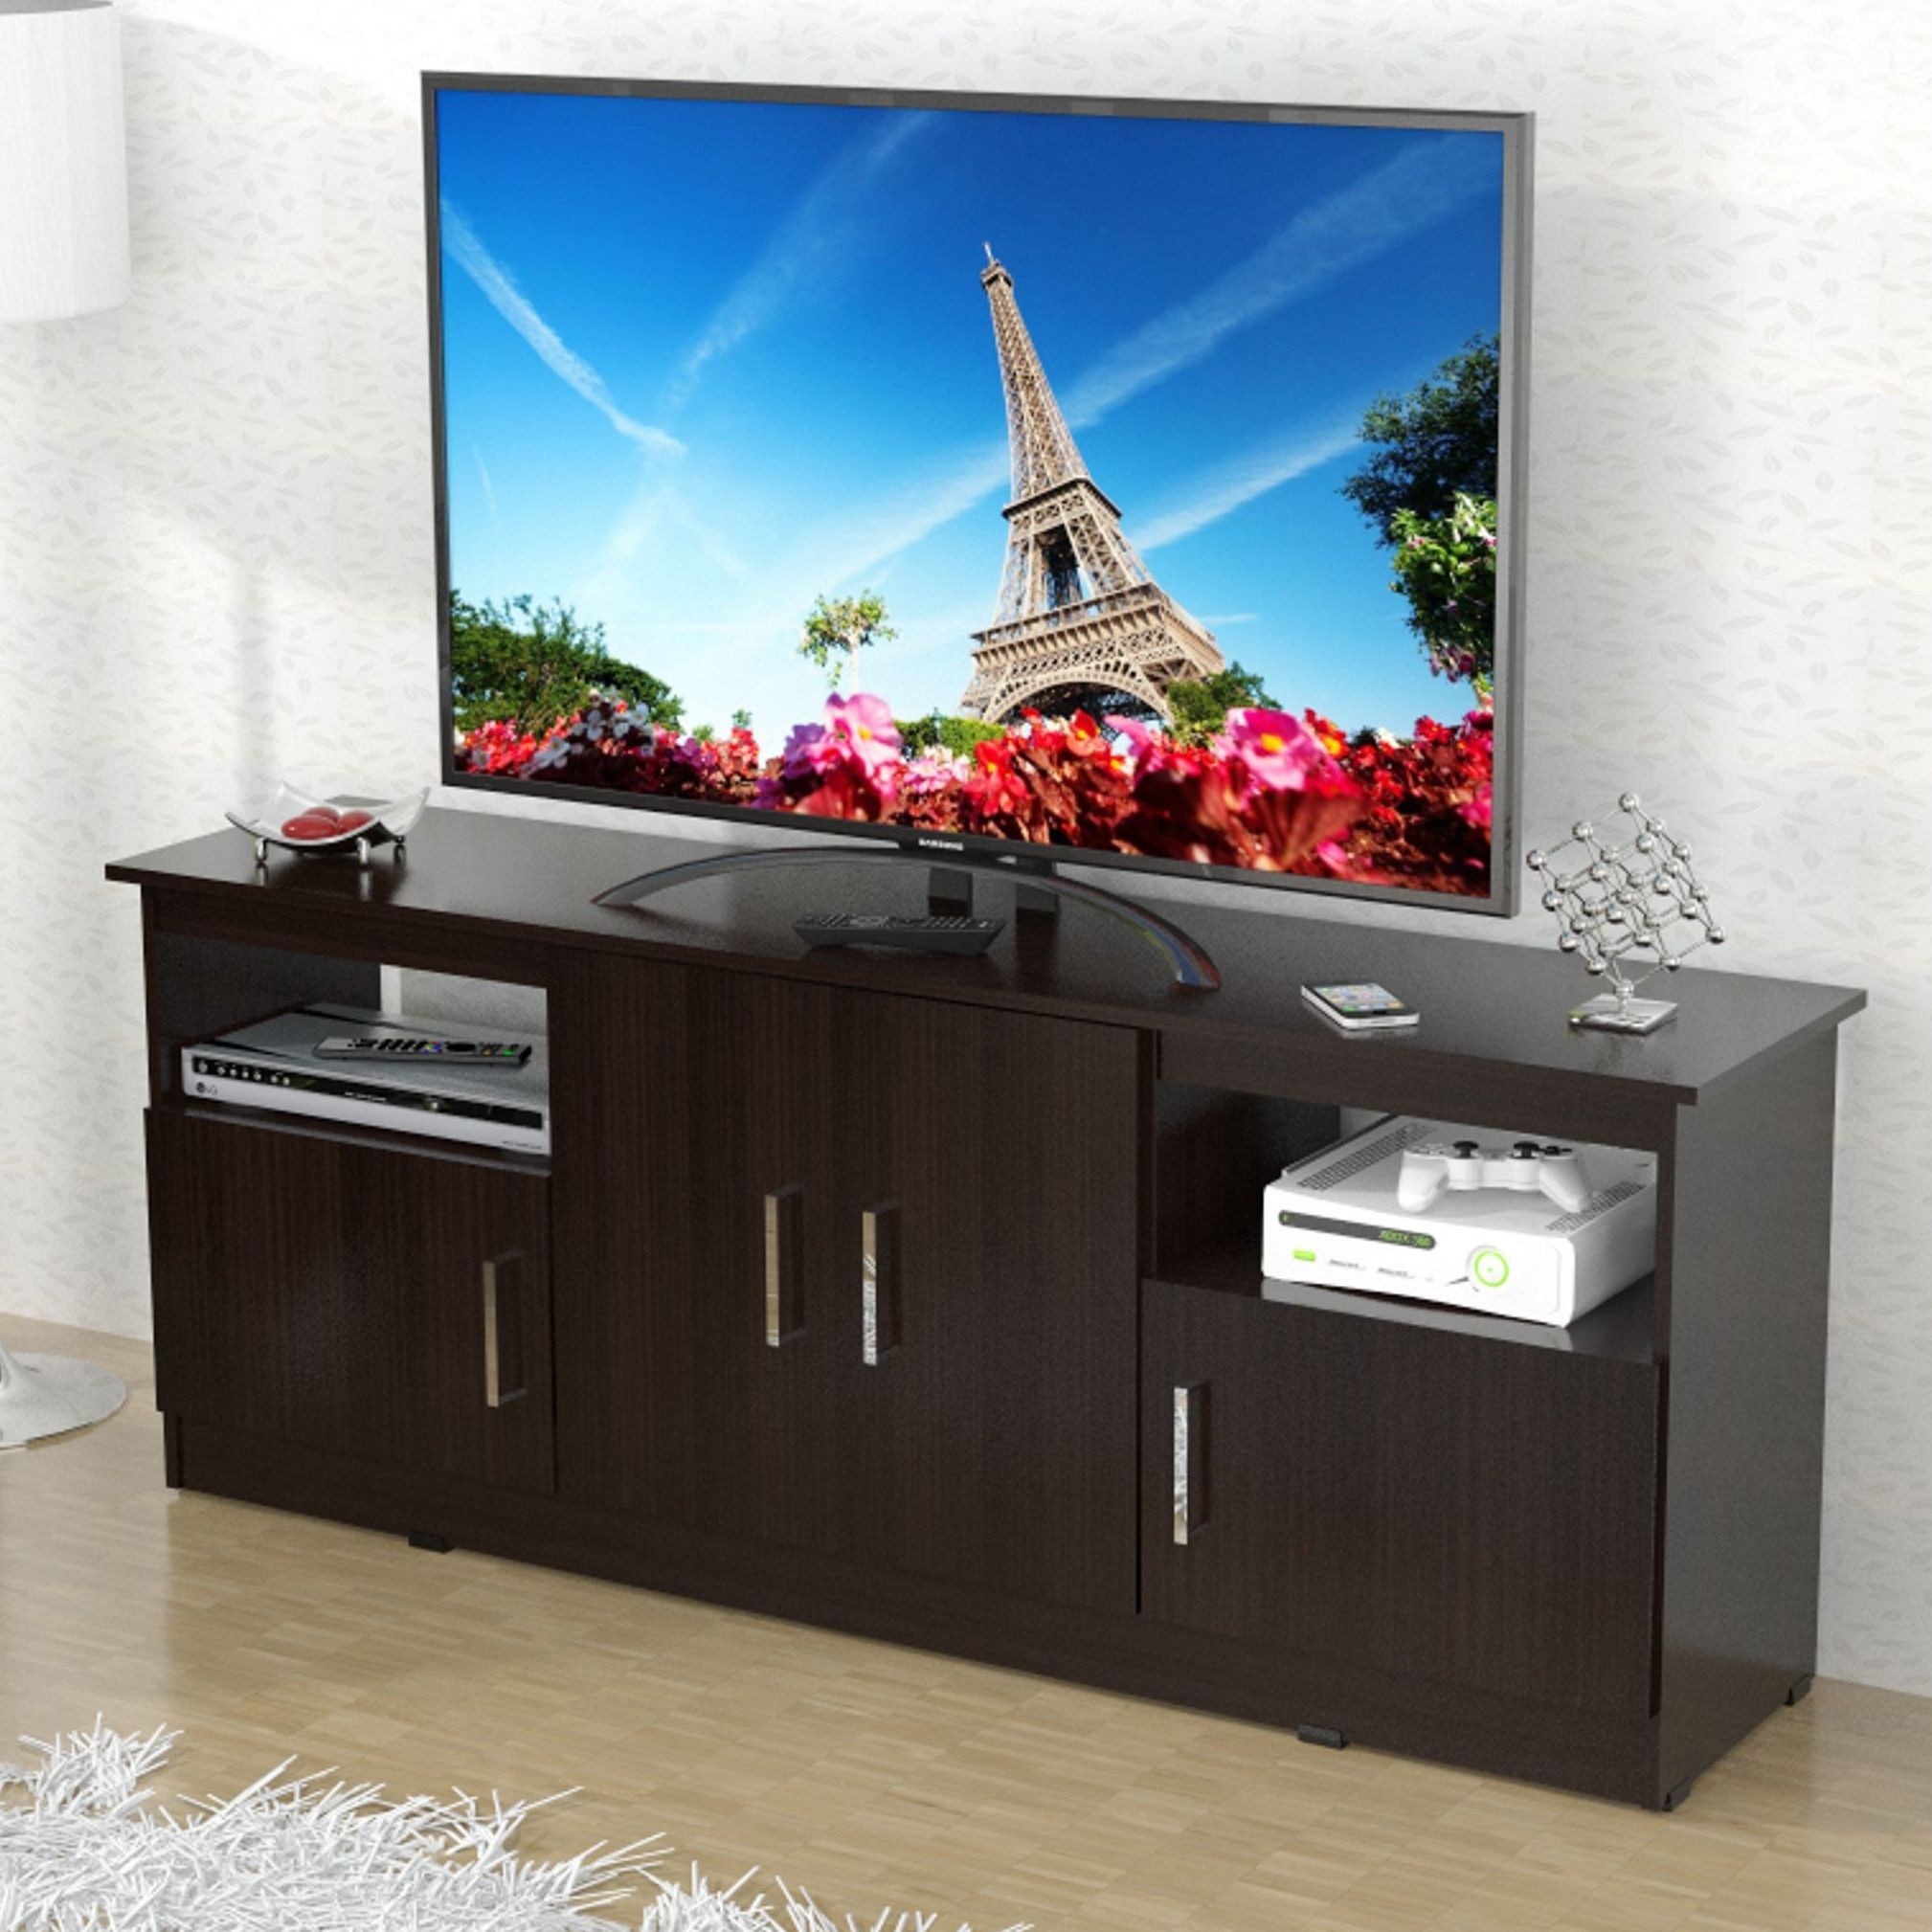 Lincoln TV Stand